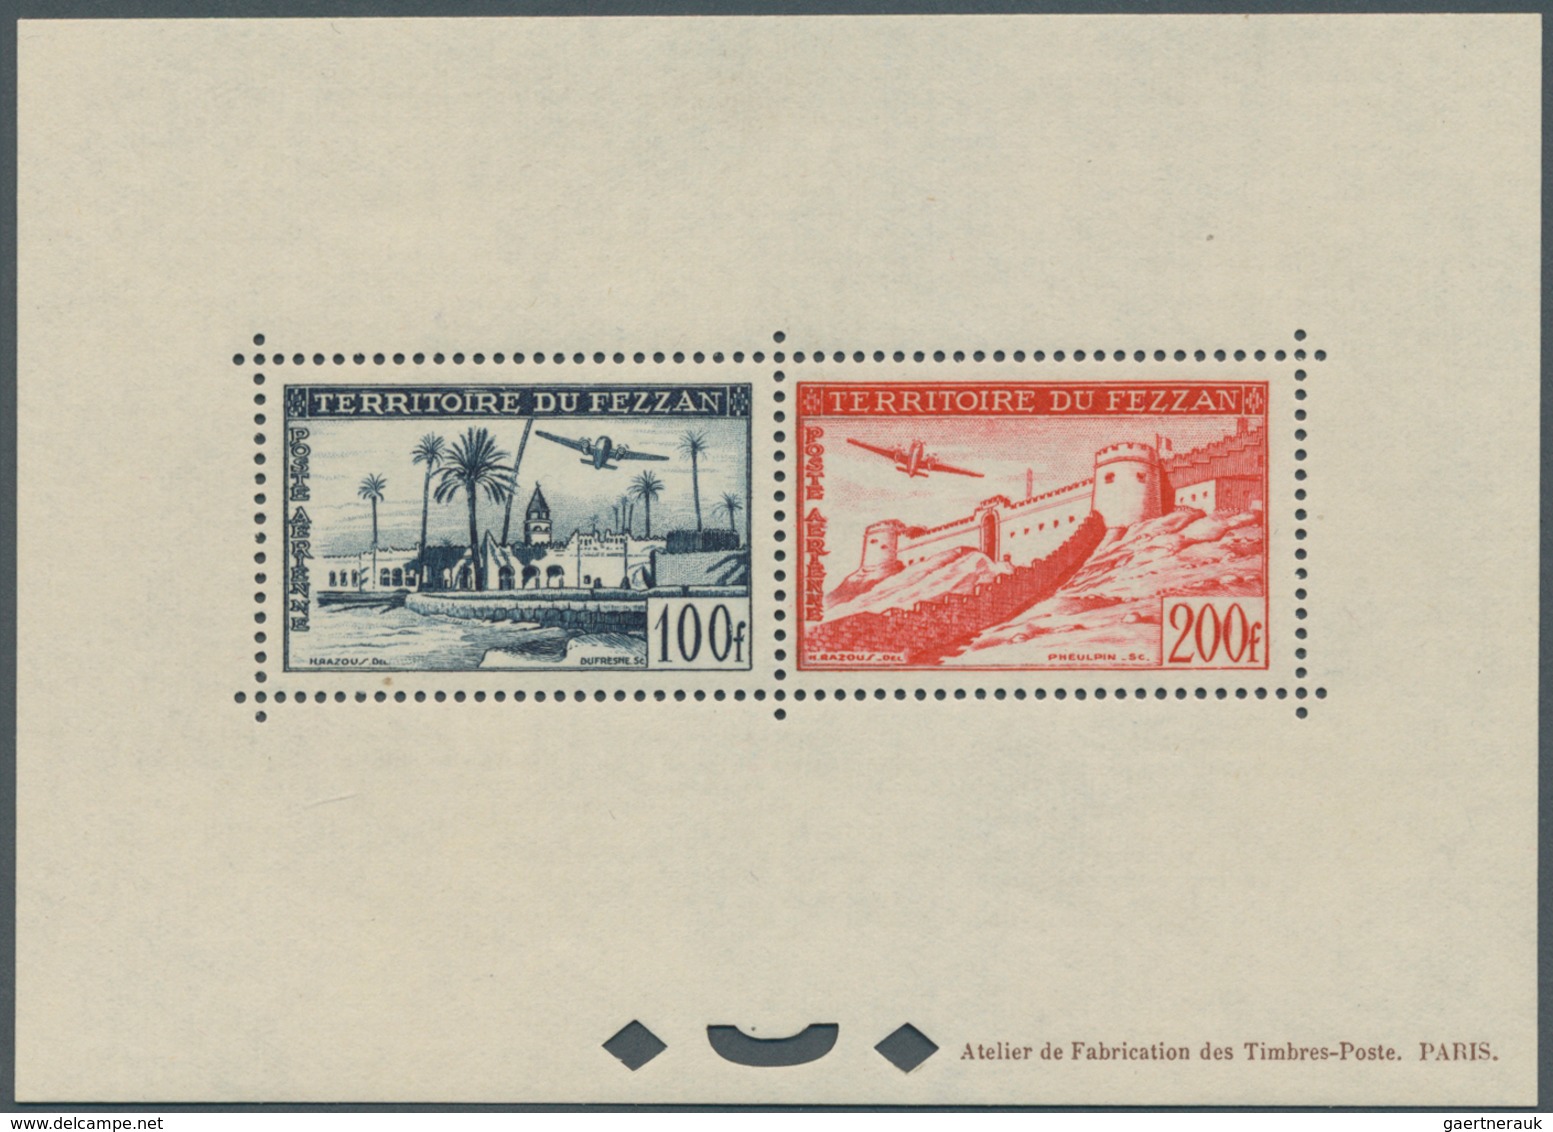 Fezzan: 1951, Airmails, Bloc Speciaux, Unmounted Mint. Very Rare, Only Few Known. Maury BS3 - Lettres & Documents